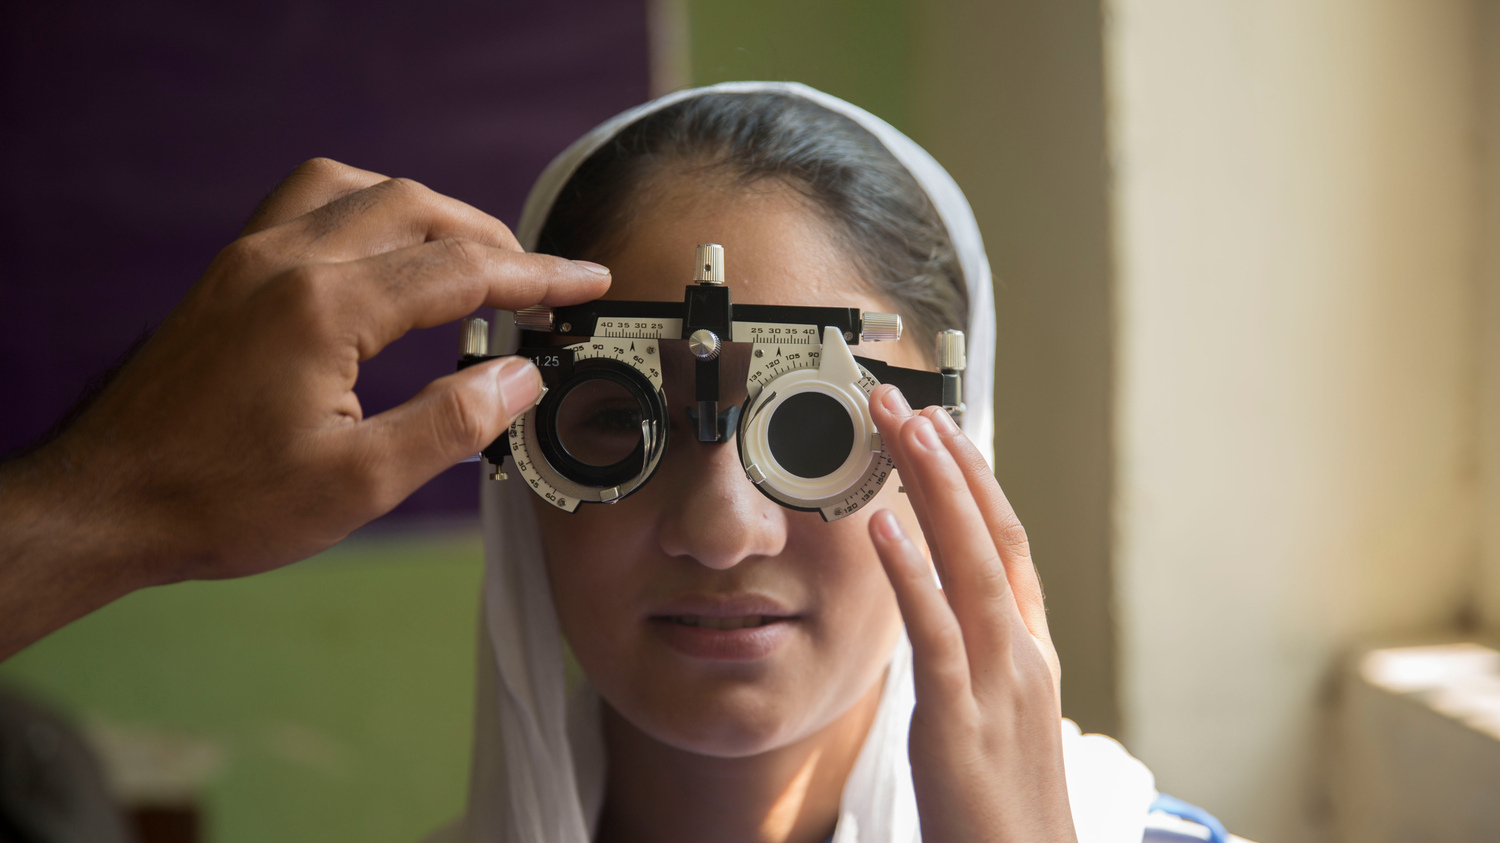 A girl is pictured wearing a white headscarf. She is trying on a special pair of glasses, as part of a vision test. A doctor's hand is seen adjusting the glasses.